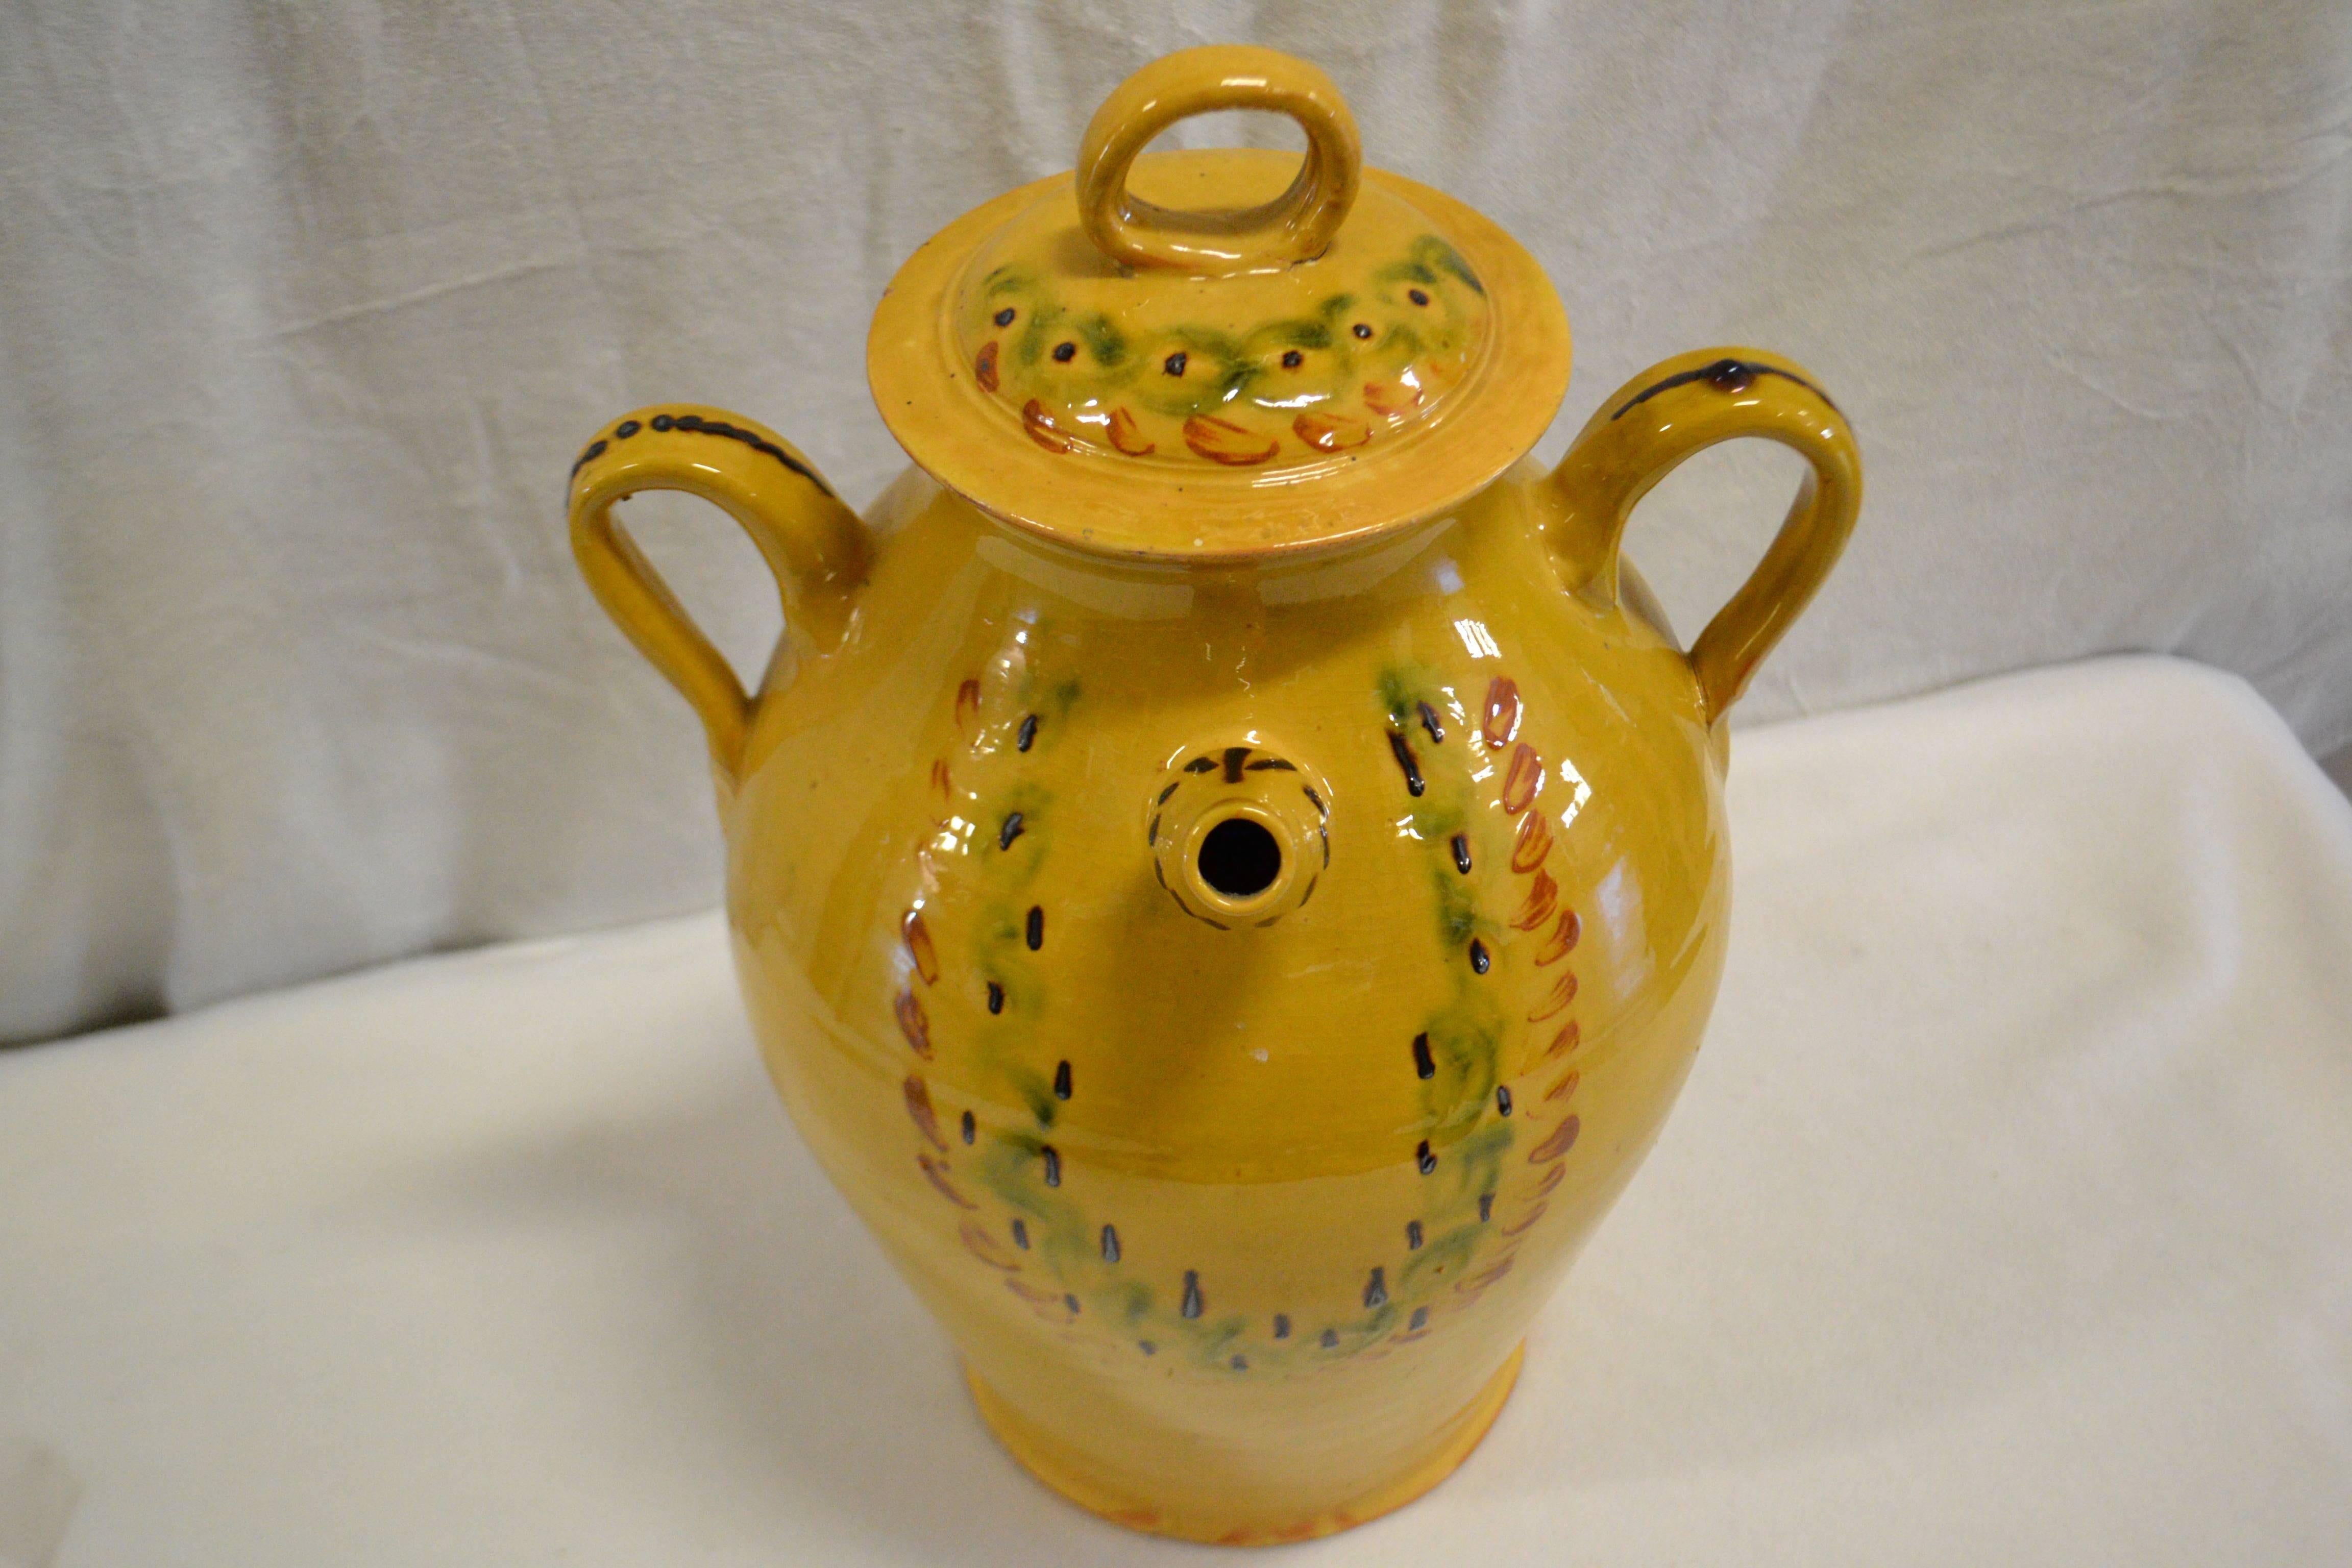 Turn of the century earthenware water jug with cream glaze and green and red finger style markings motif with handled lid and thin spout. Once a common piece of pottery used daily in French kitchens, these earthenware jugs have become showcase